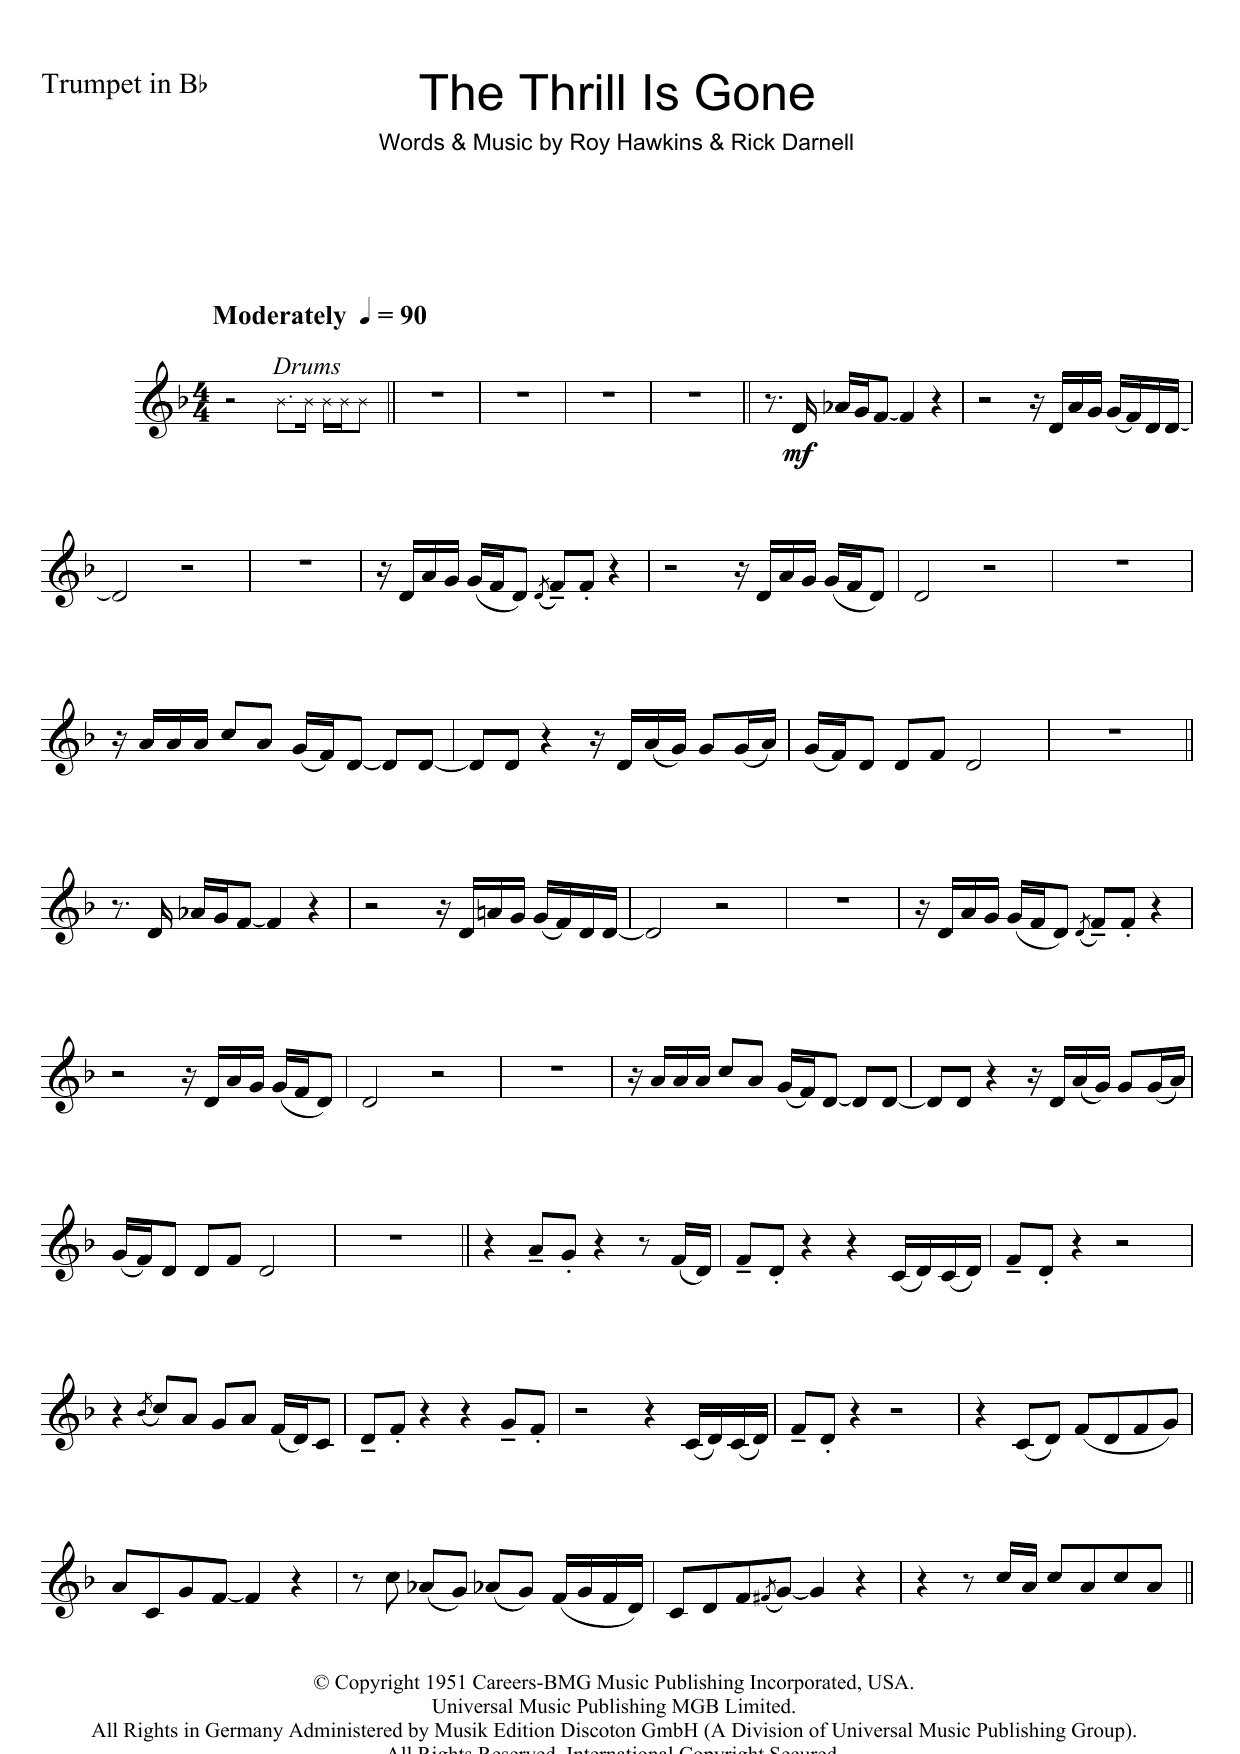 Download B.B. King The Thrill Is Gone Sheet Music